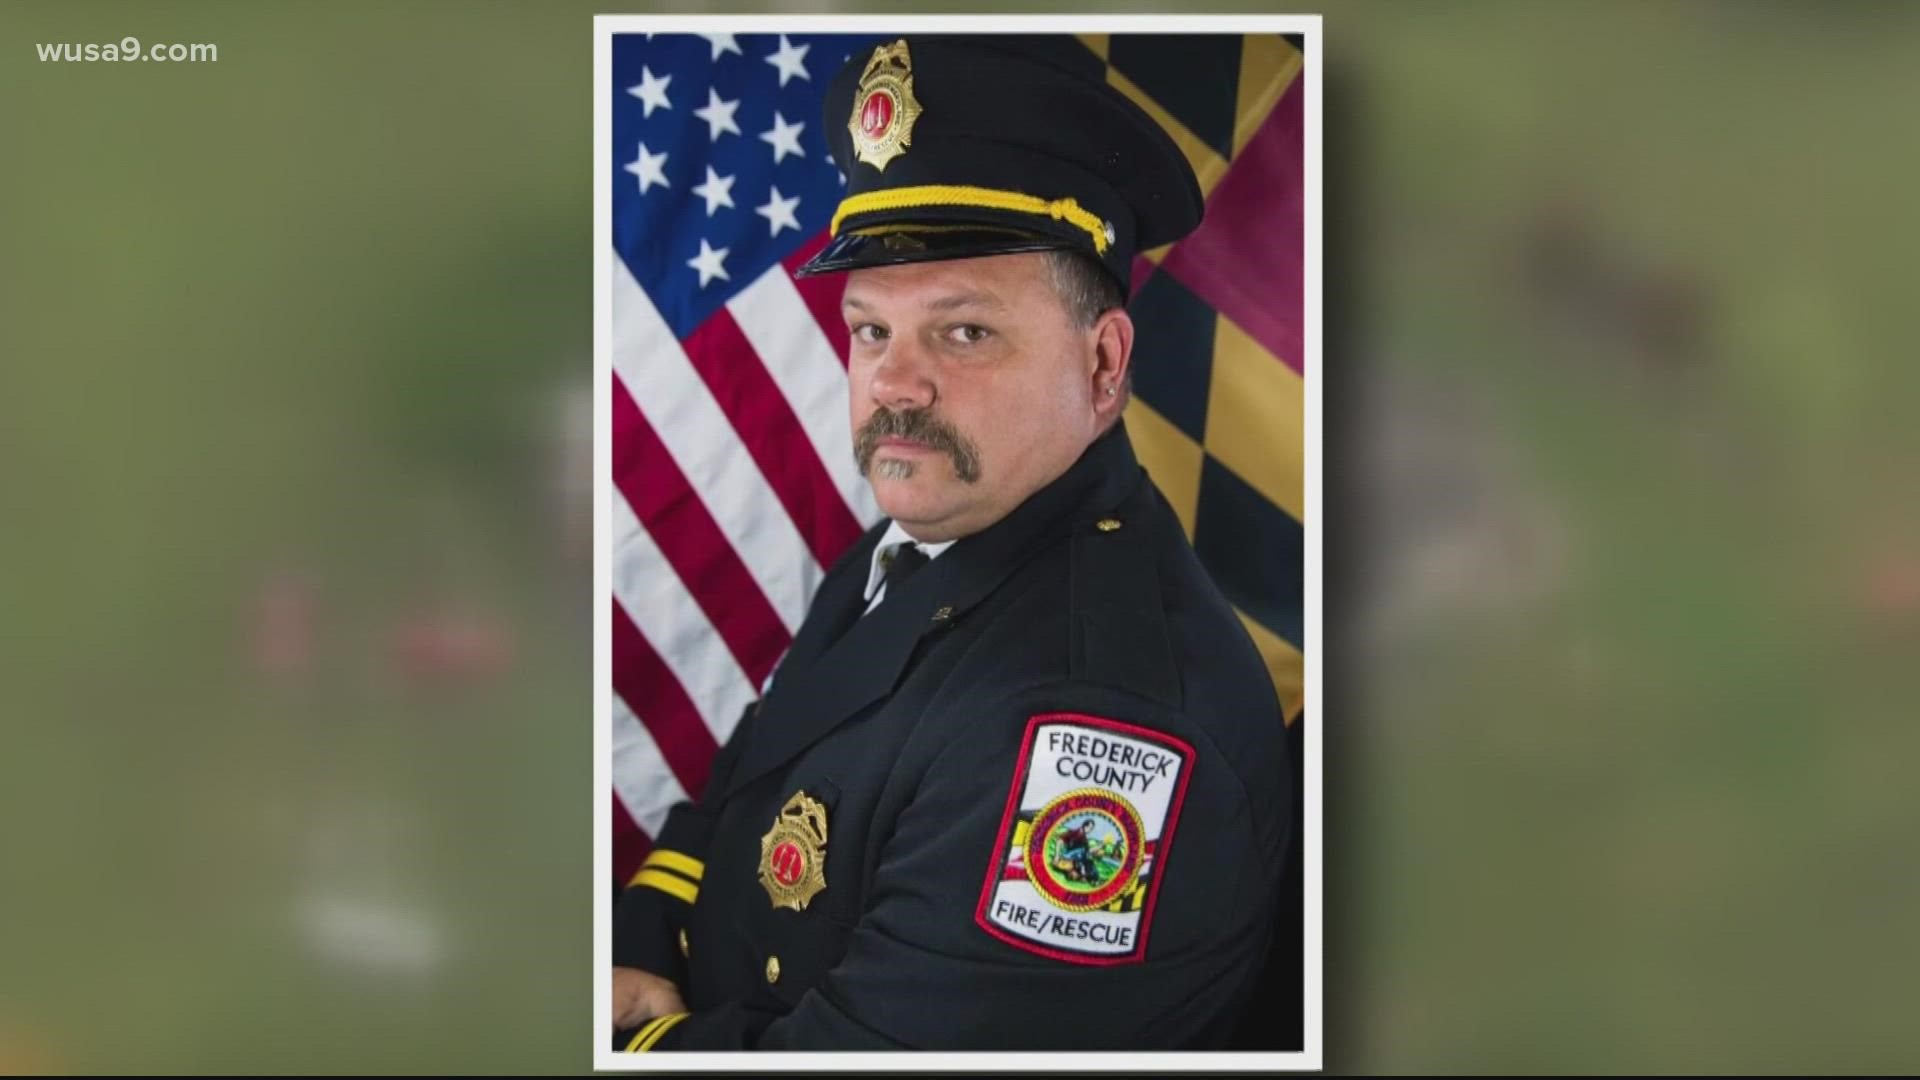 Friends and colleagues of fallen Frederick County Fire Captain Joshua Laird are beginning to pull back the curtain on their grief in the wake of his death.